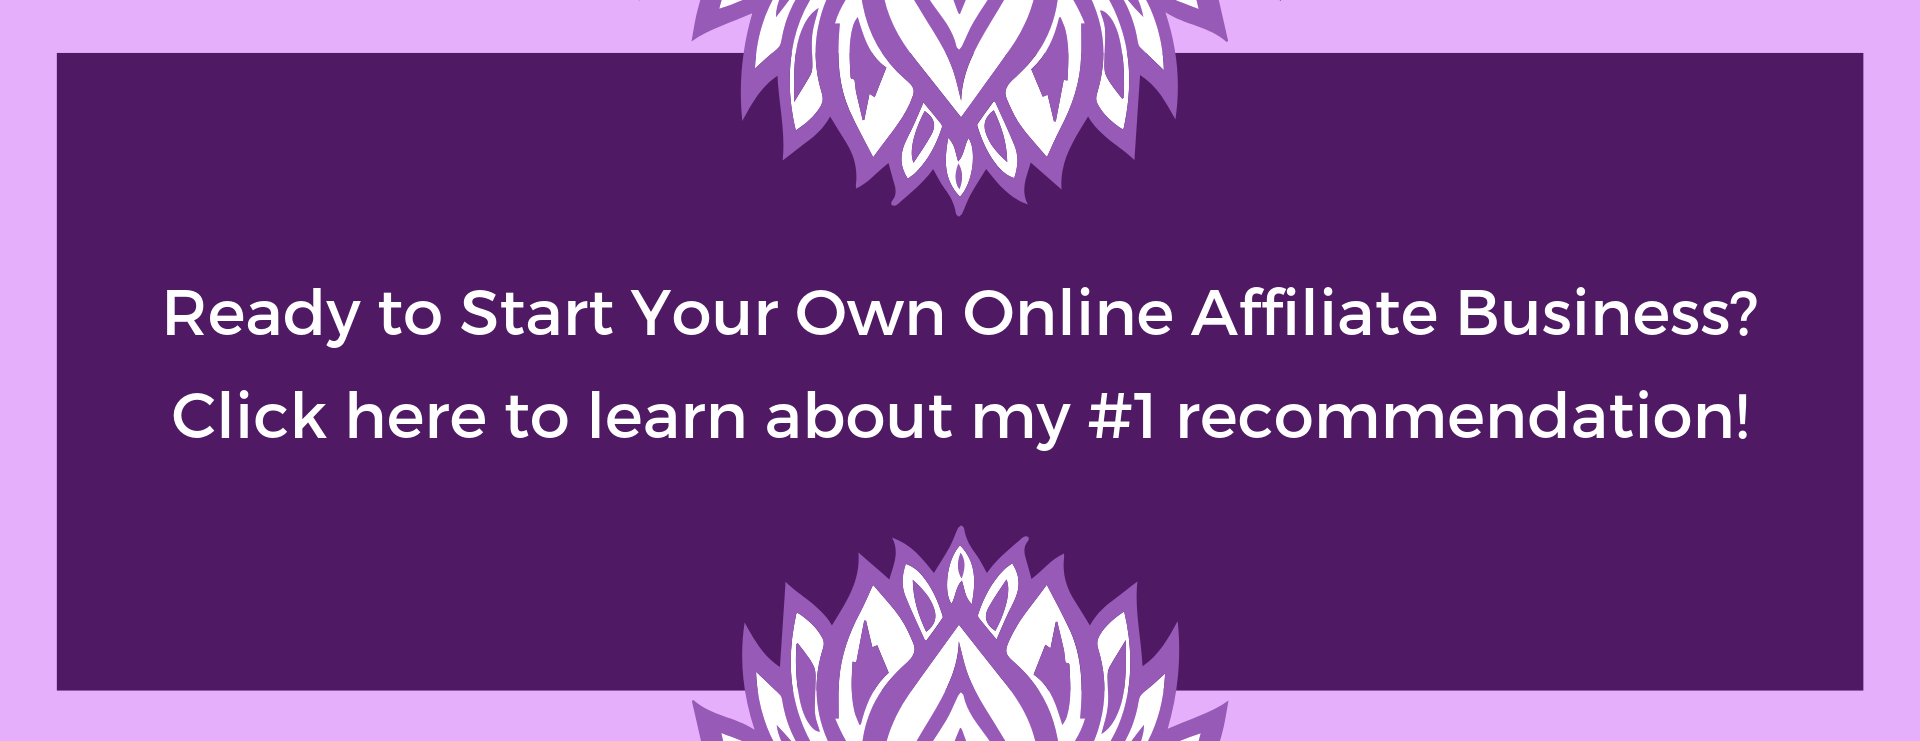 Ready to Start Your Own Online Affiliate Business